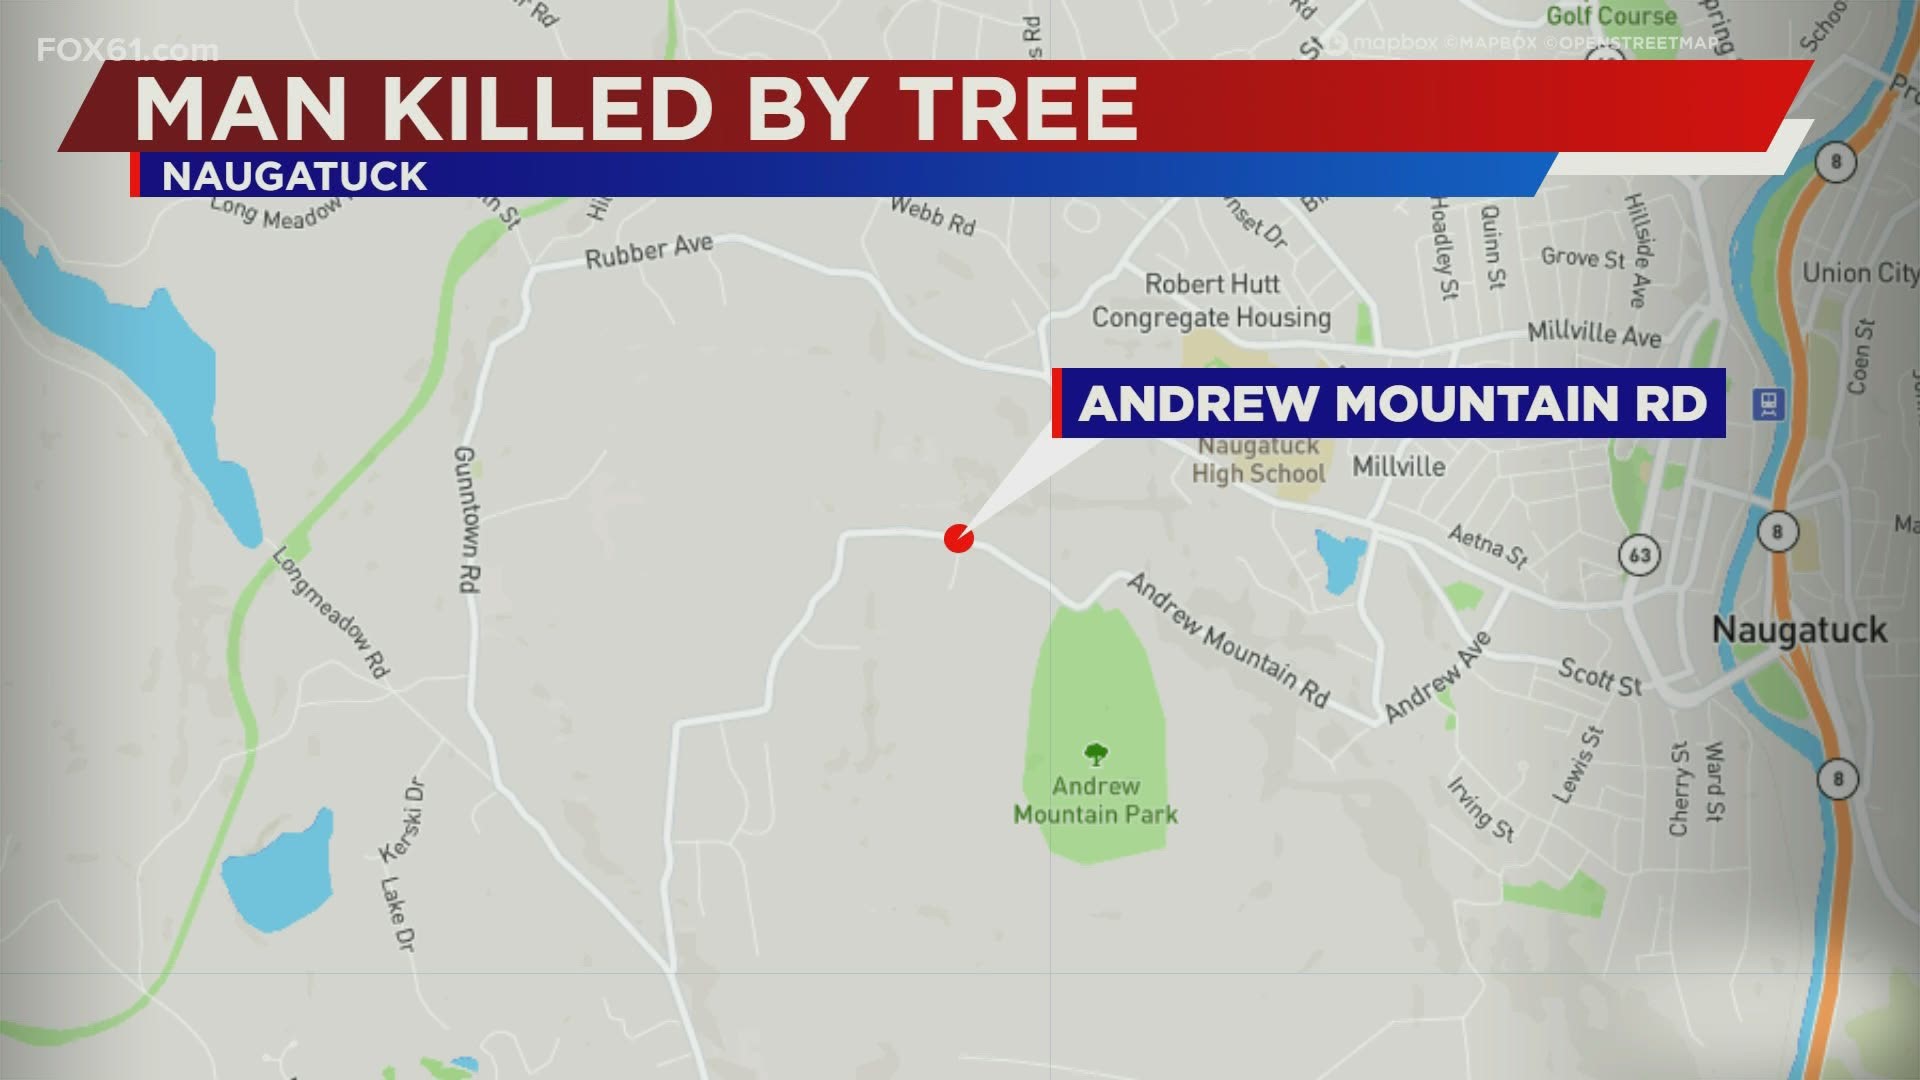 Police responded to the area of Andrew Mountain Road and Red Maple Court just after 3:30 p.m. to an incident where a man tried to move branches from the road.